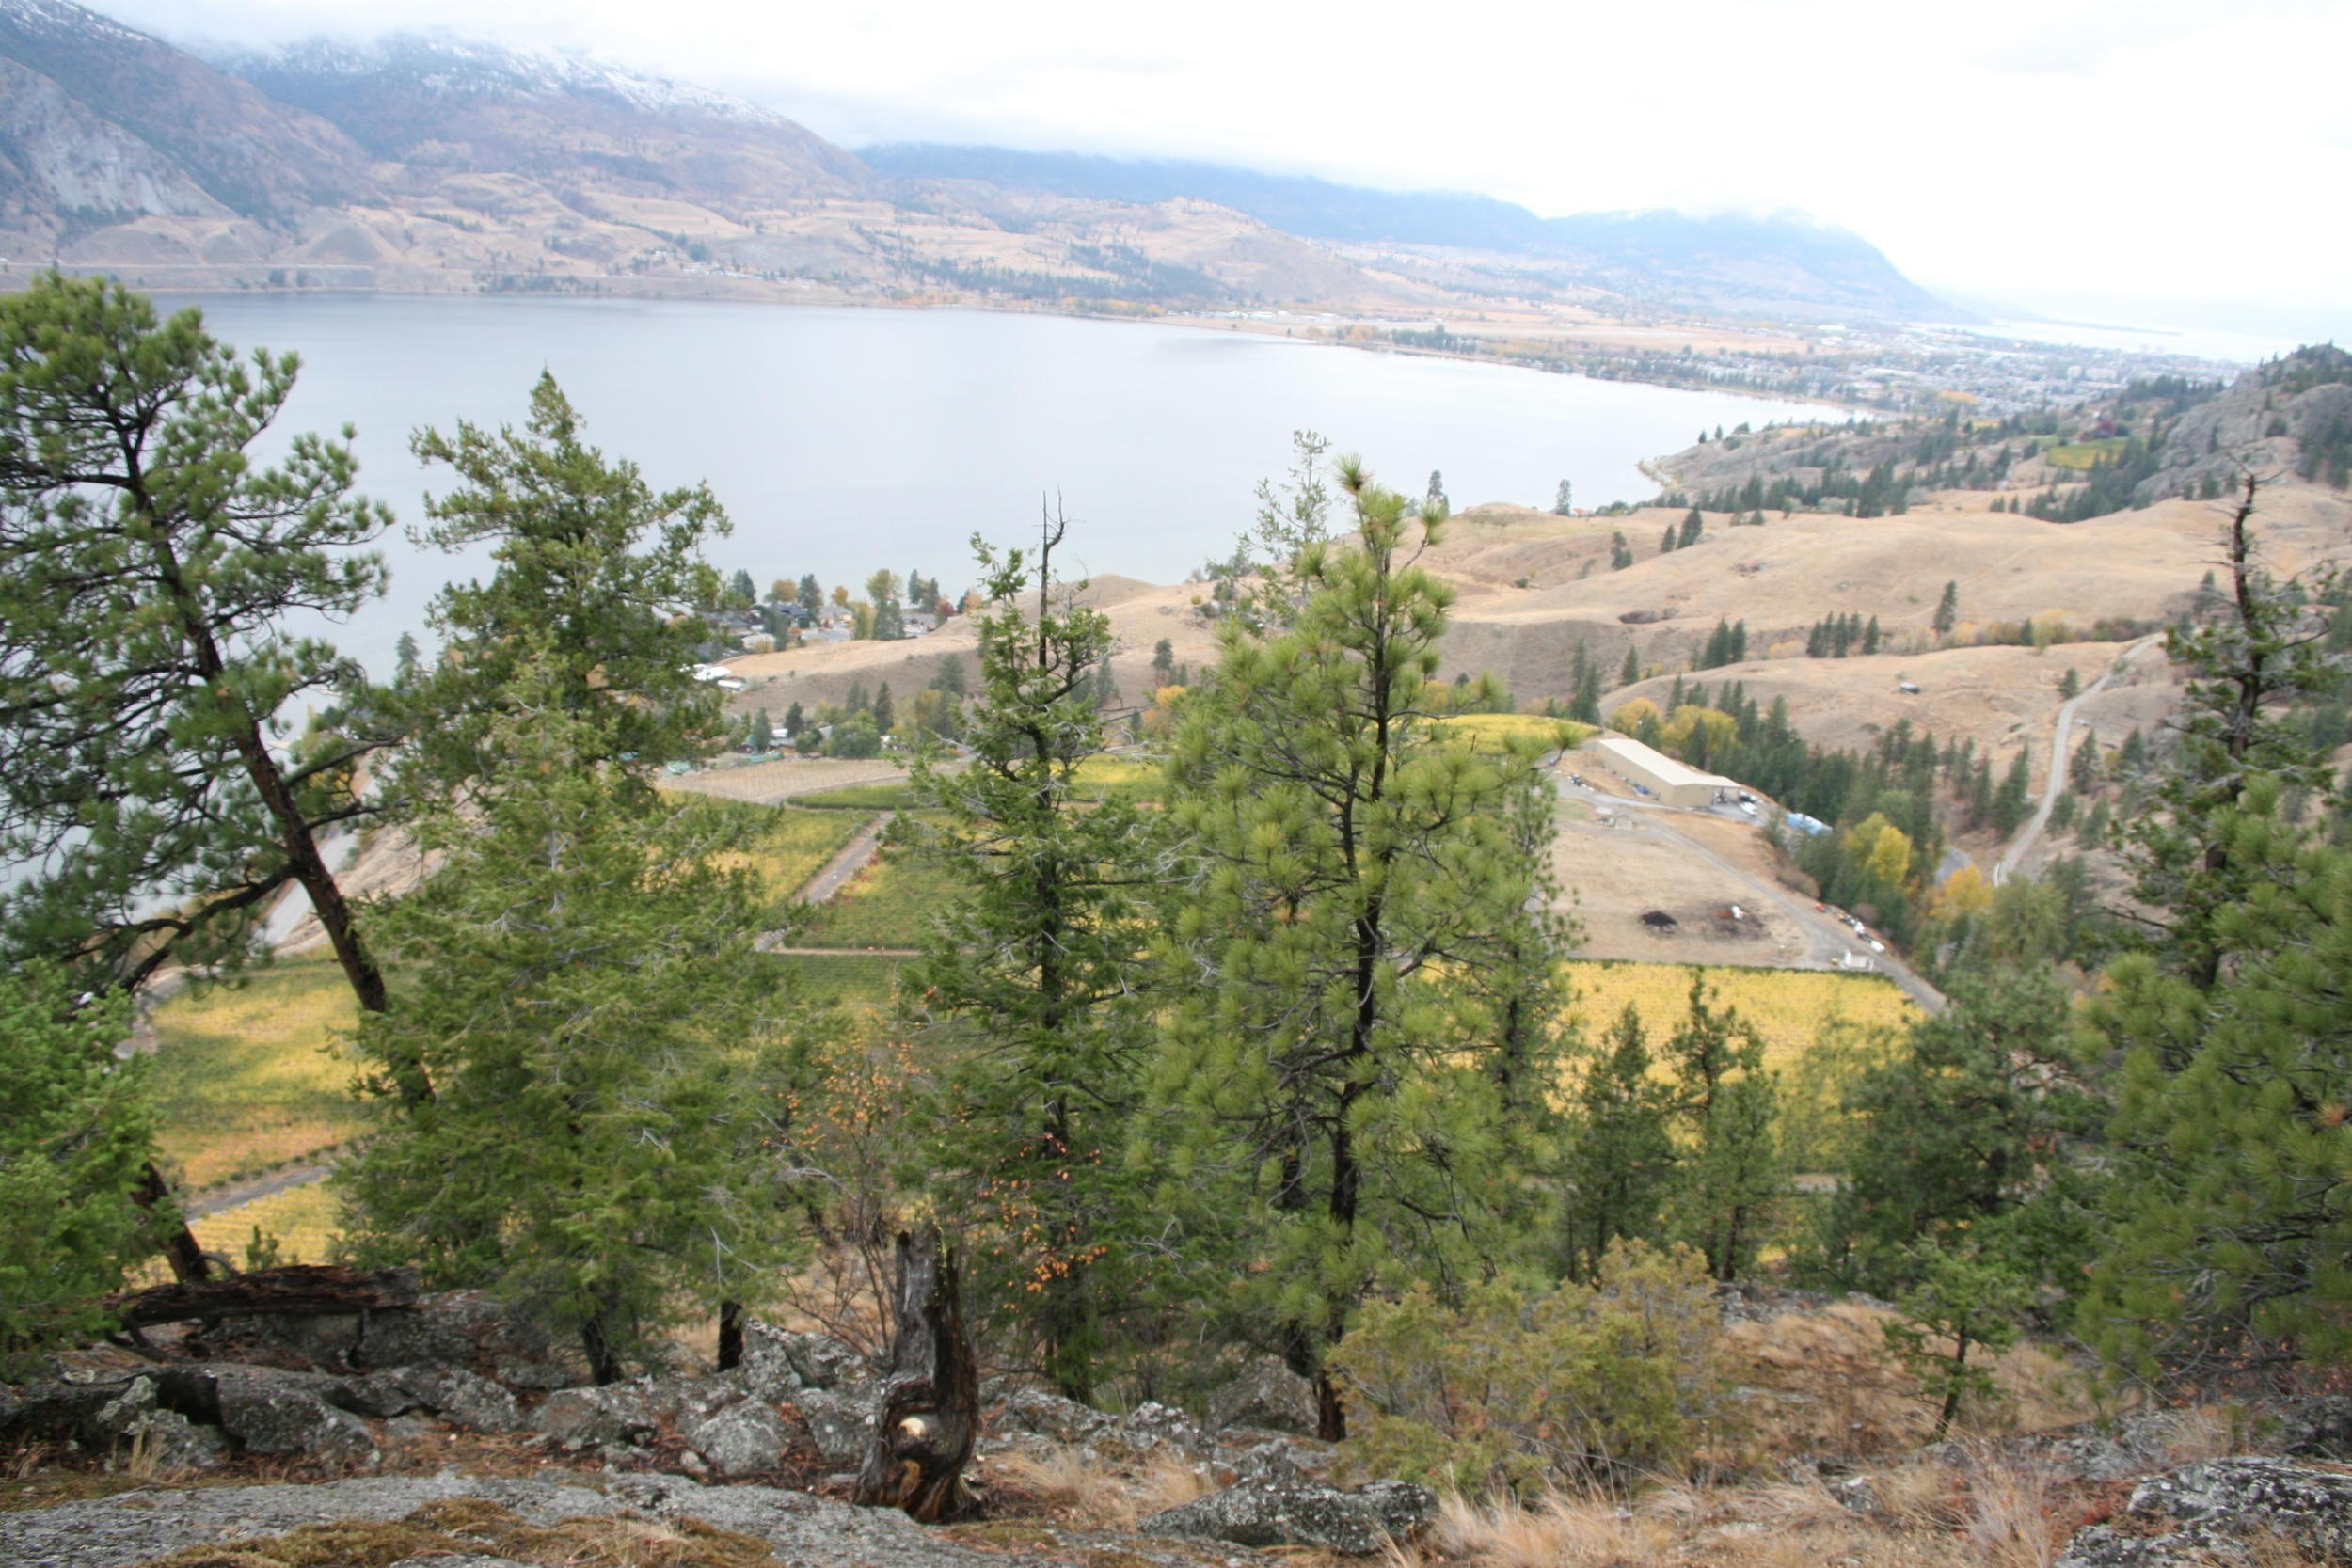  The view down over the vineyard from atop the bluffs. You can see Penticton and Lake Okanagan in the distance to the north. 